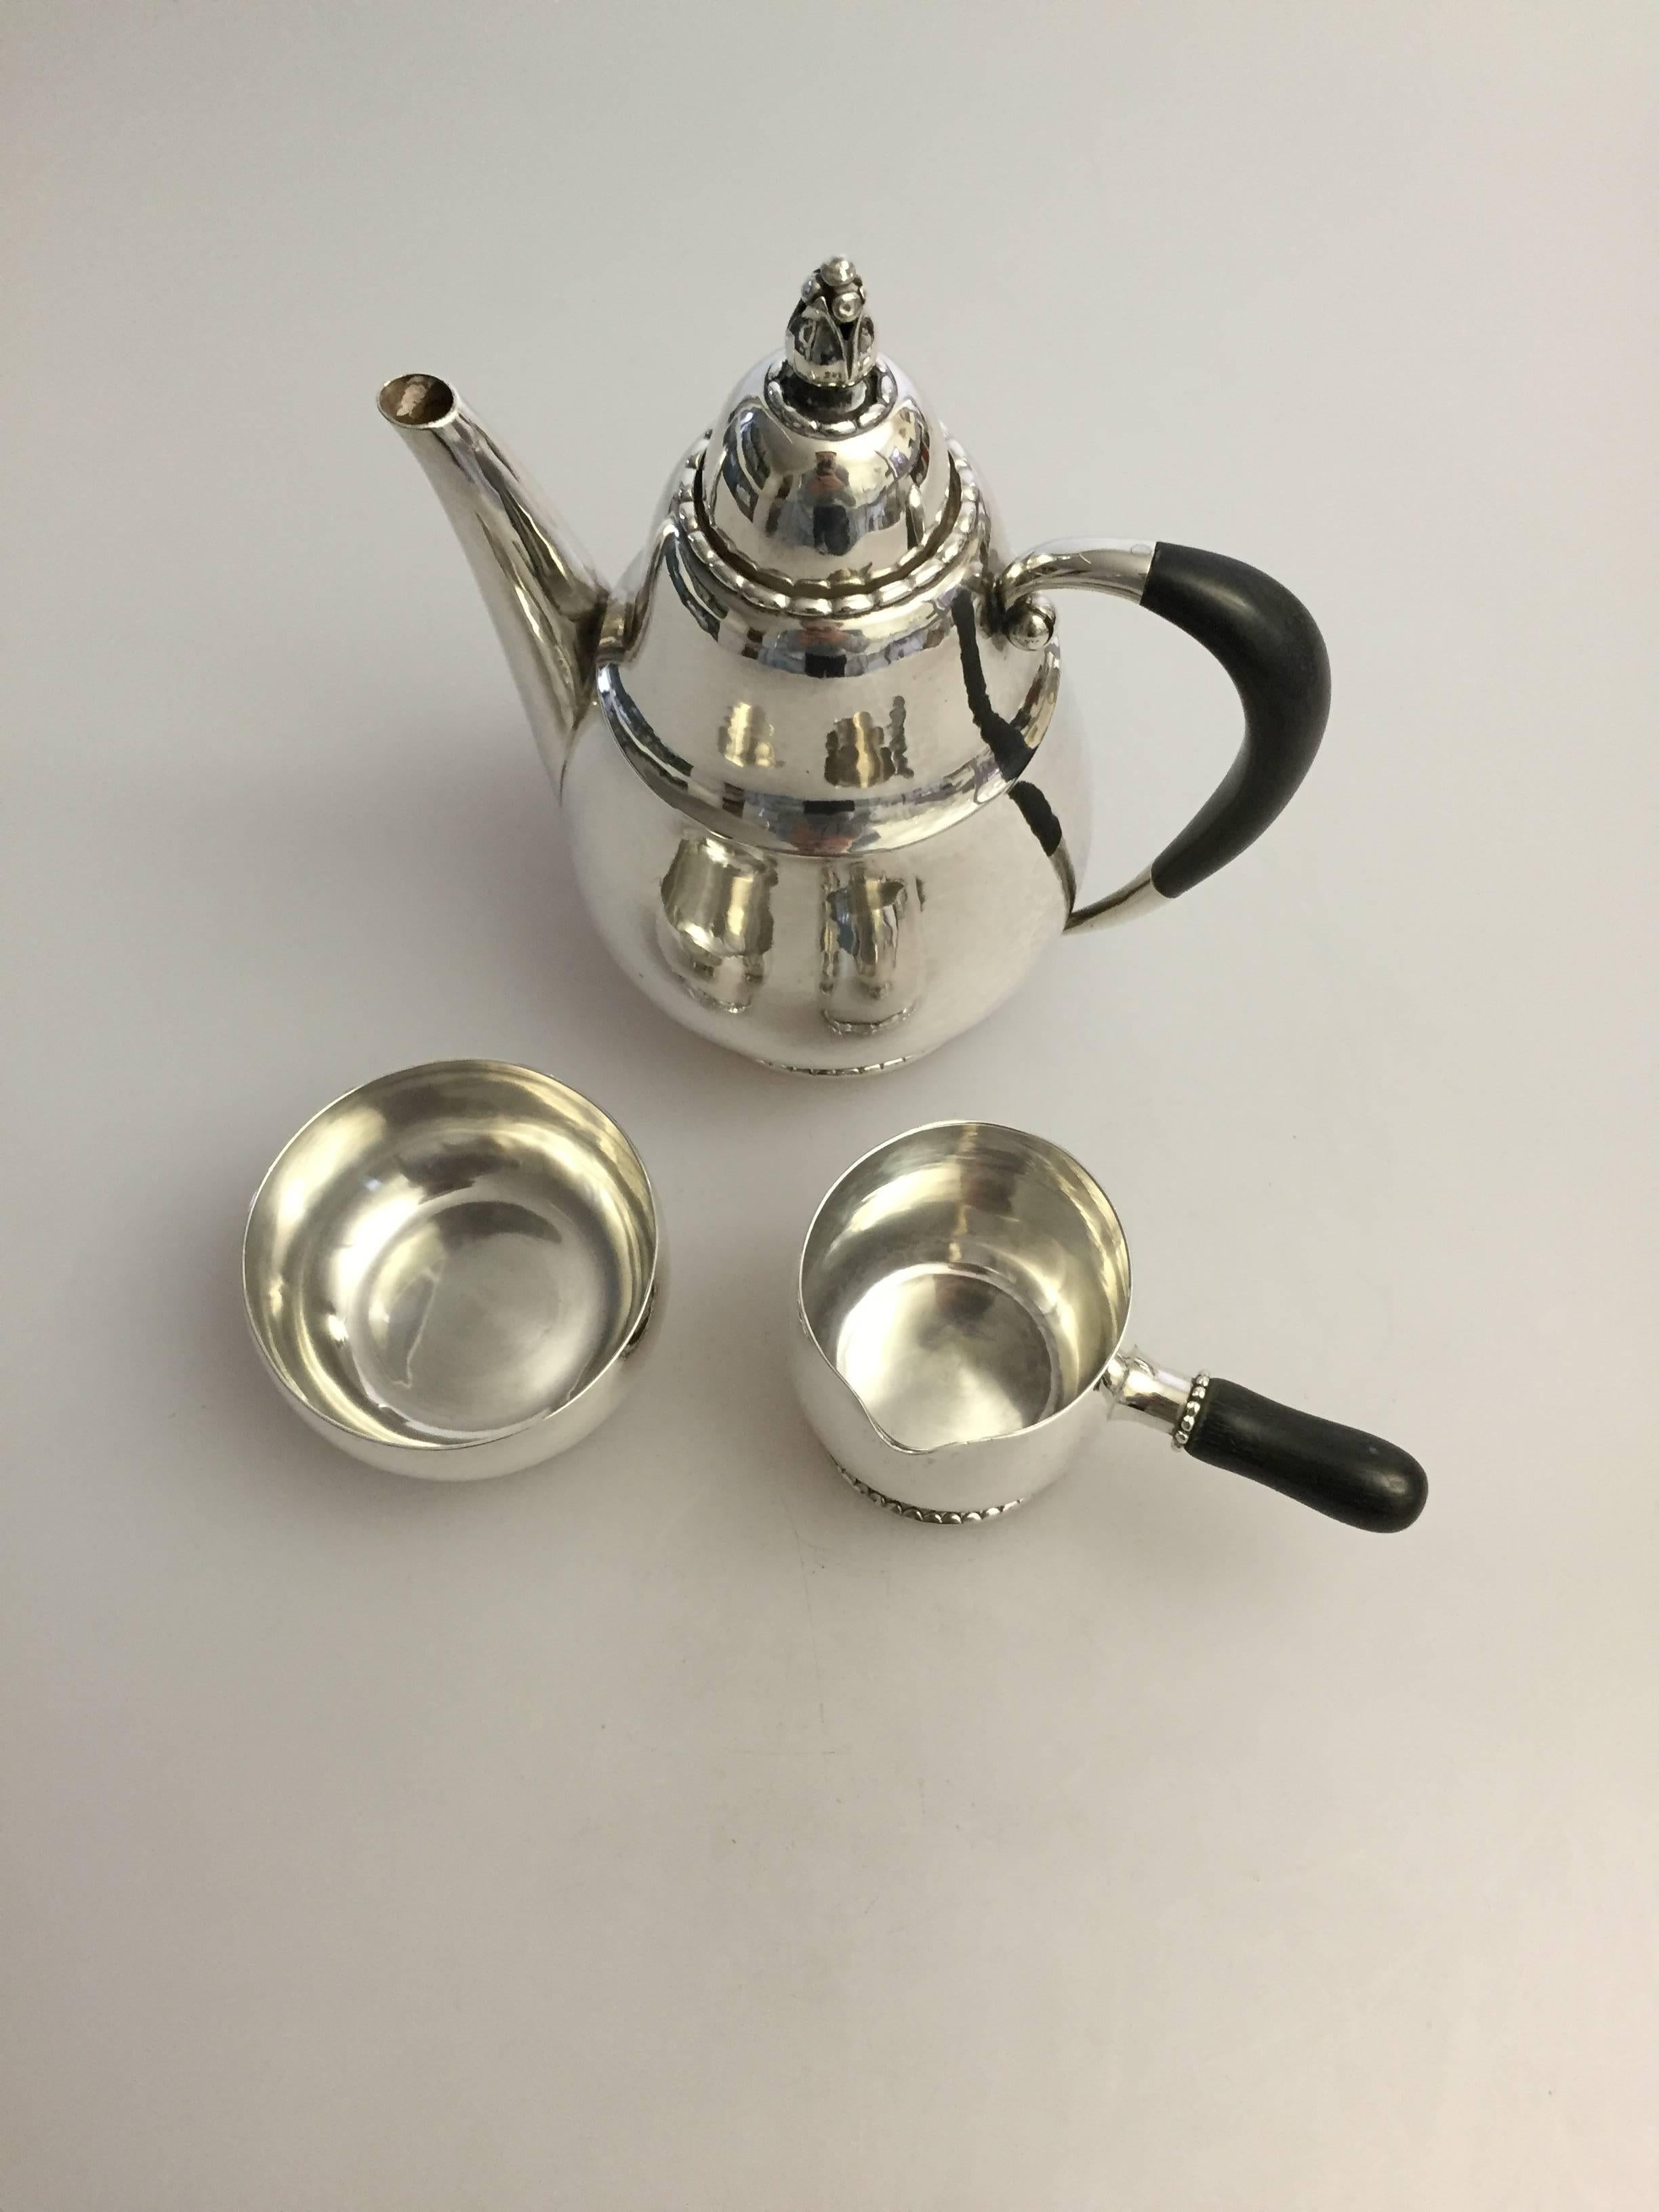 Georg Jensen sterling silver mocca coffee set #34, with pot, creamer and sugarbowl, from 1925-1933.

 Combined weight is 610 g / 21.40 oz.
 Measurements: Pot 17.5 cm H, 12 cm in diameter, creamer 7 cm H, 6 cm in diameter, sugarbowl 5 cm H, 7.3 cm